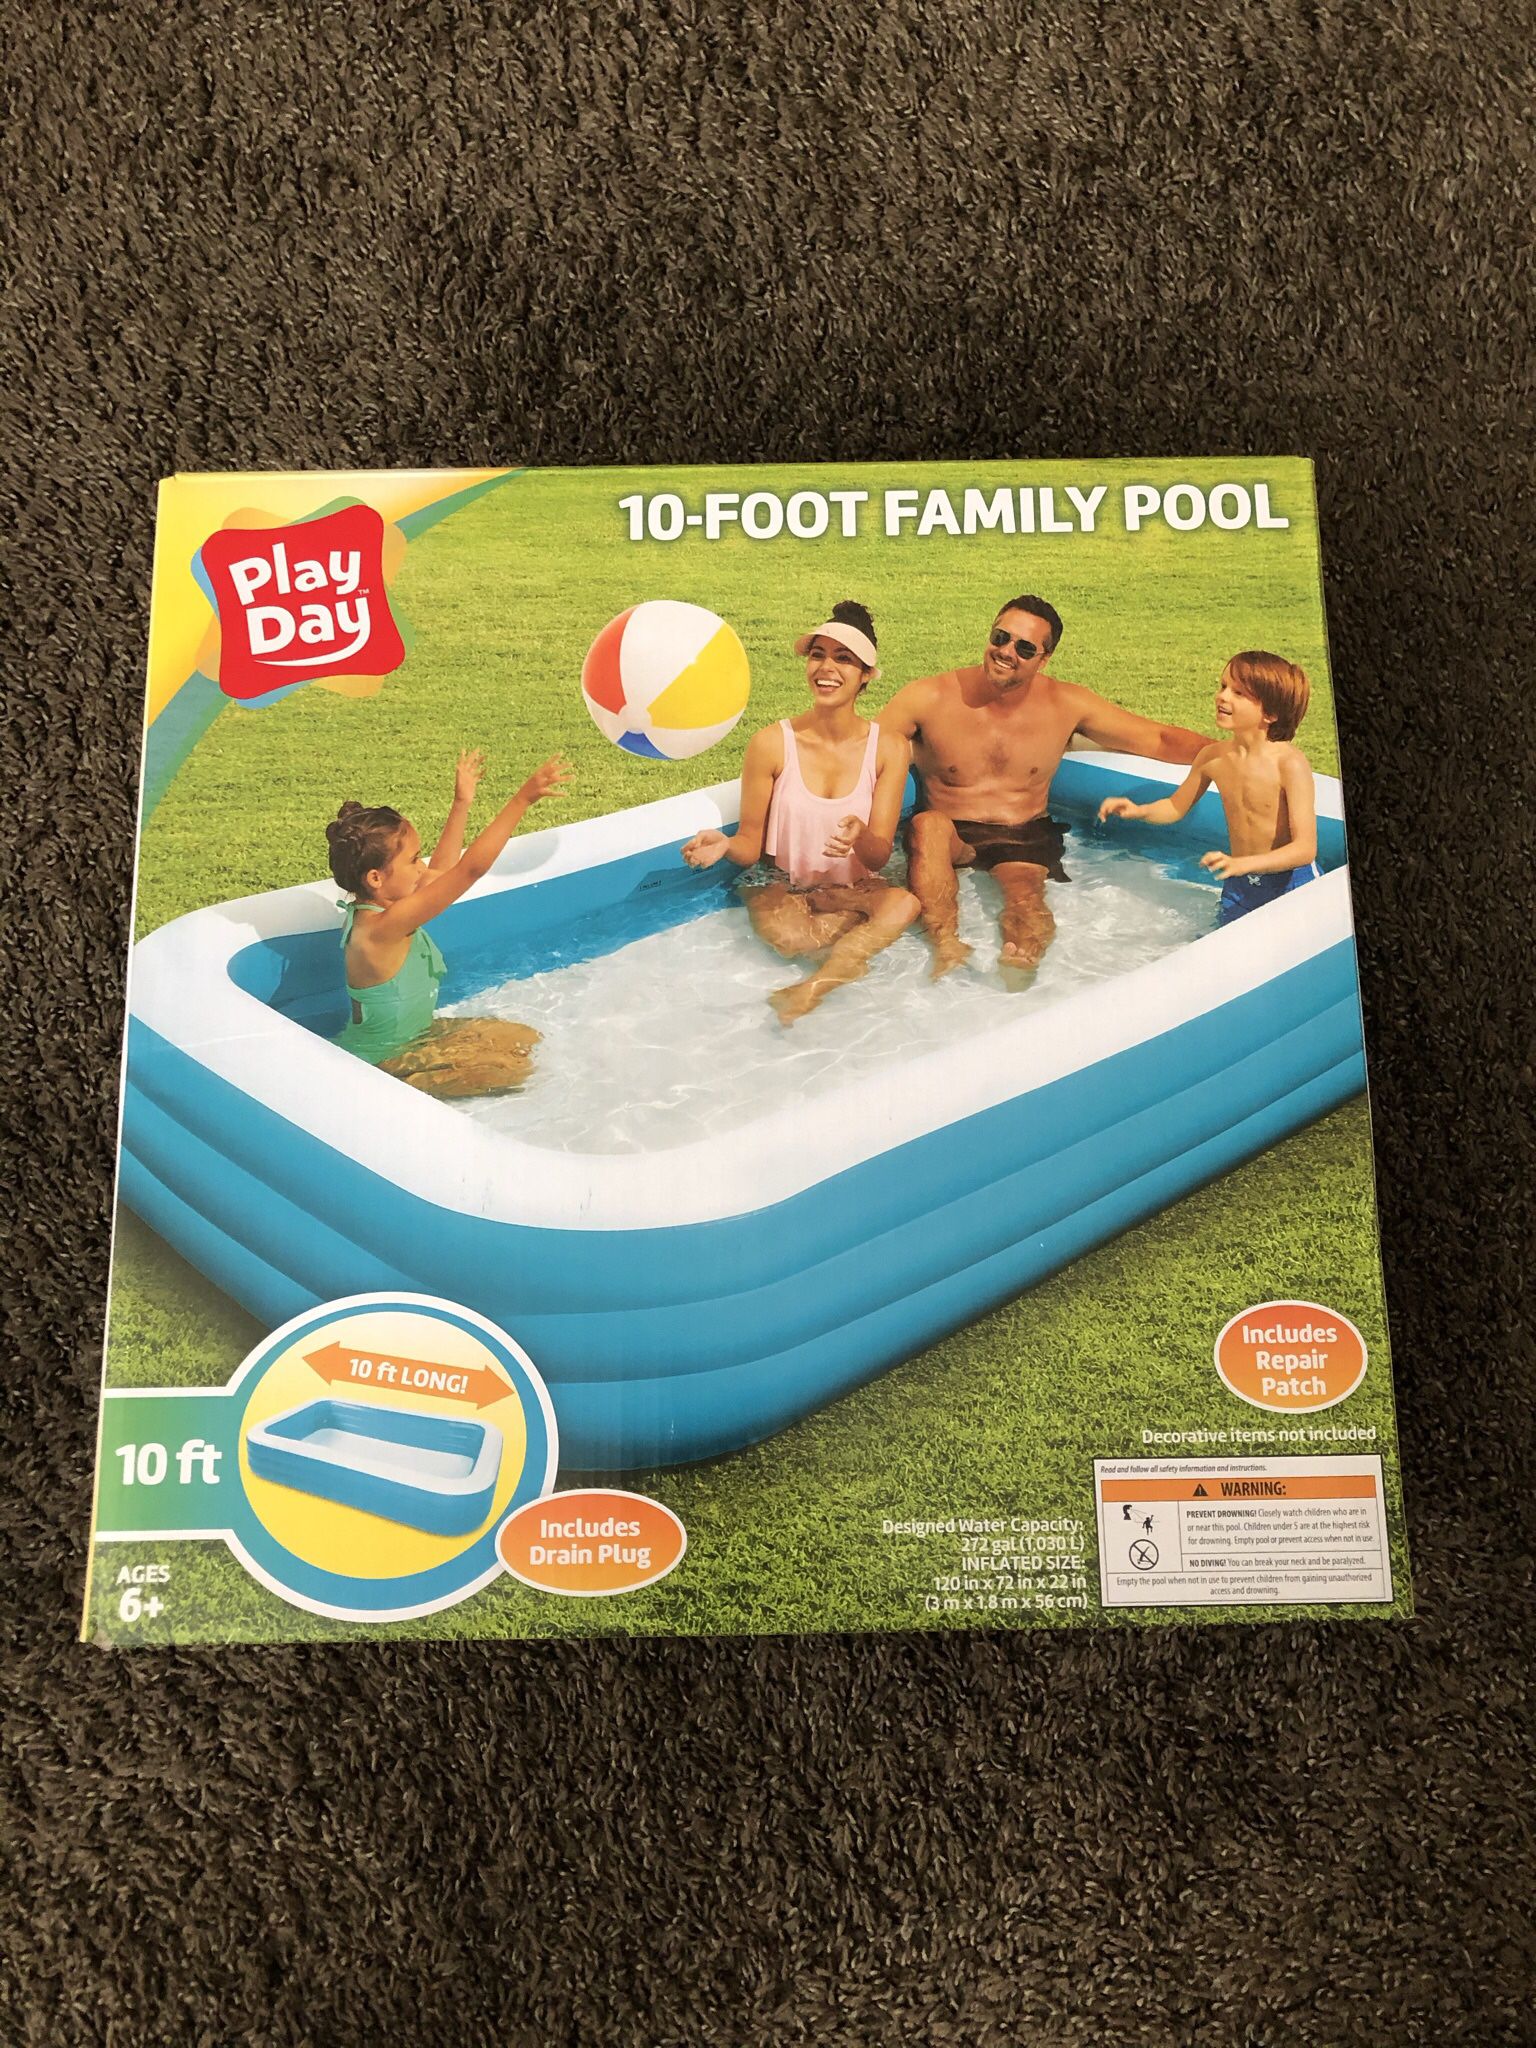 Play Day Inflatable 10' Foot Rectangular Family Pool 120"x72"x22" New In Box!